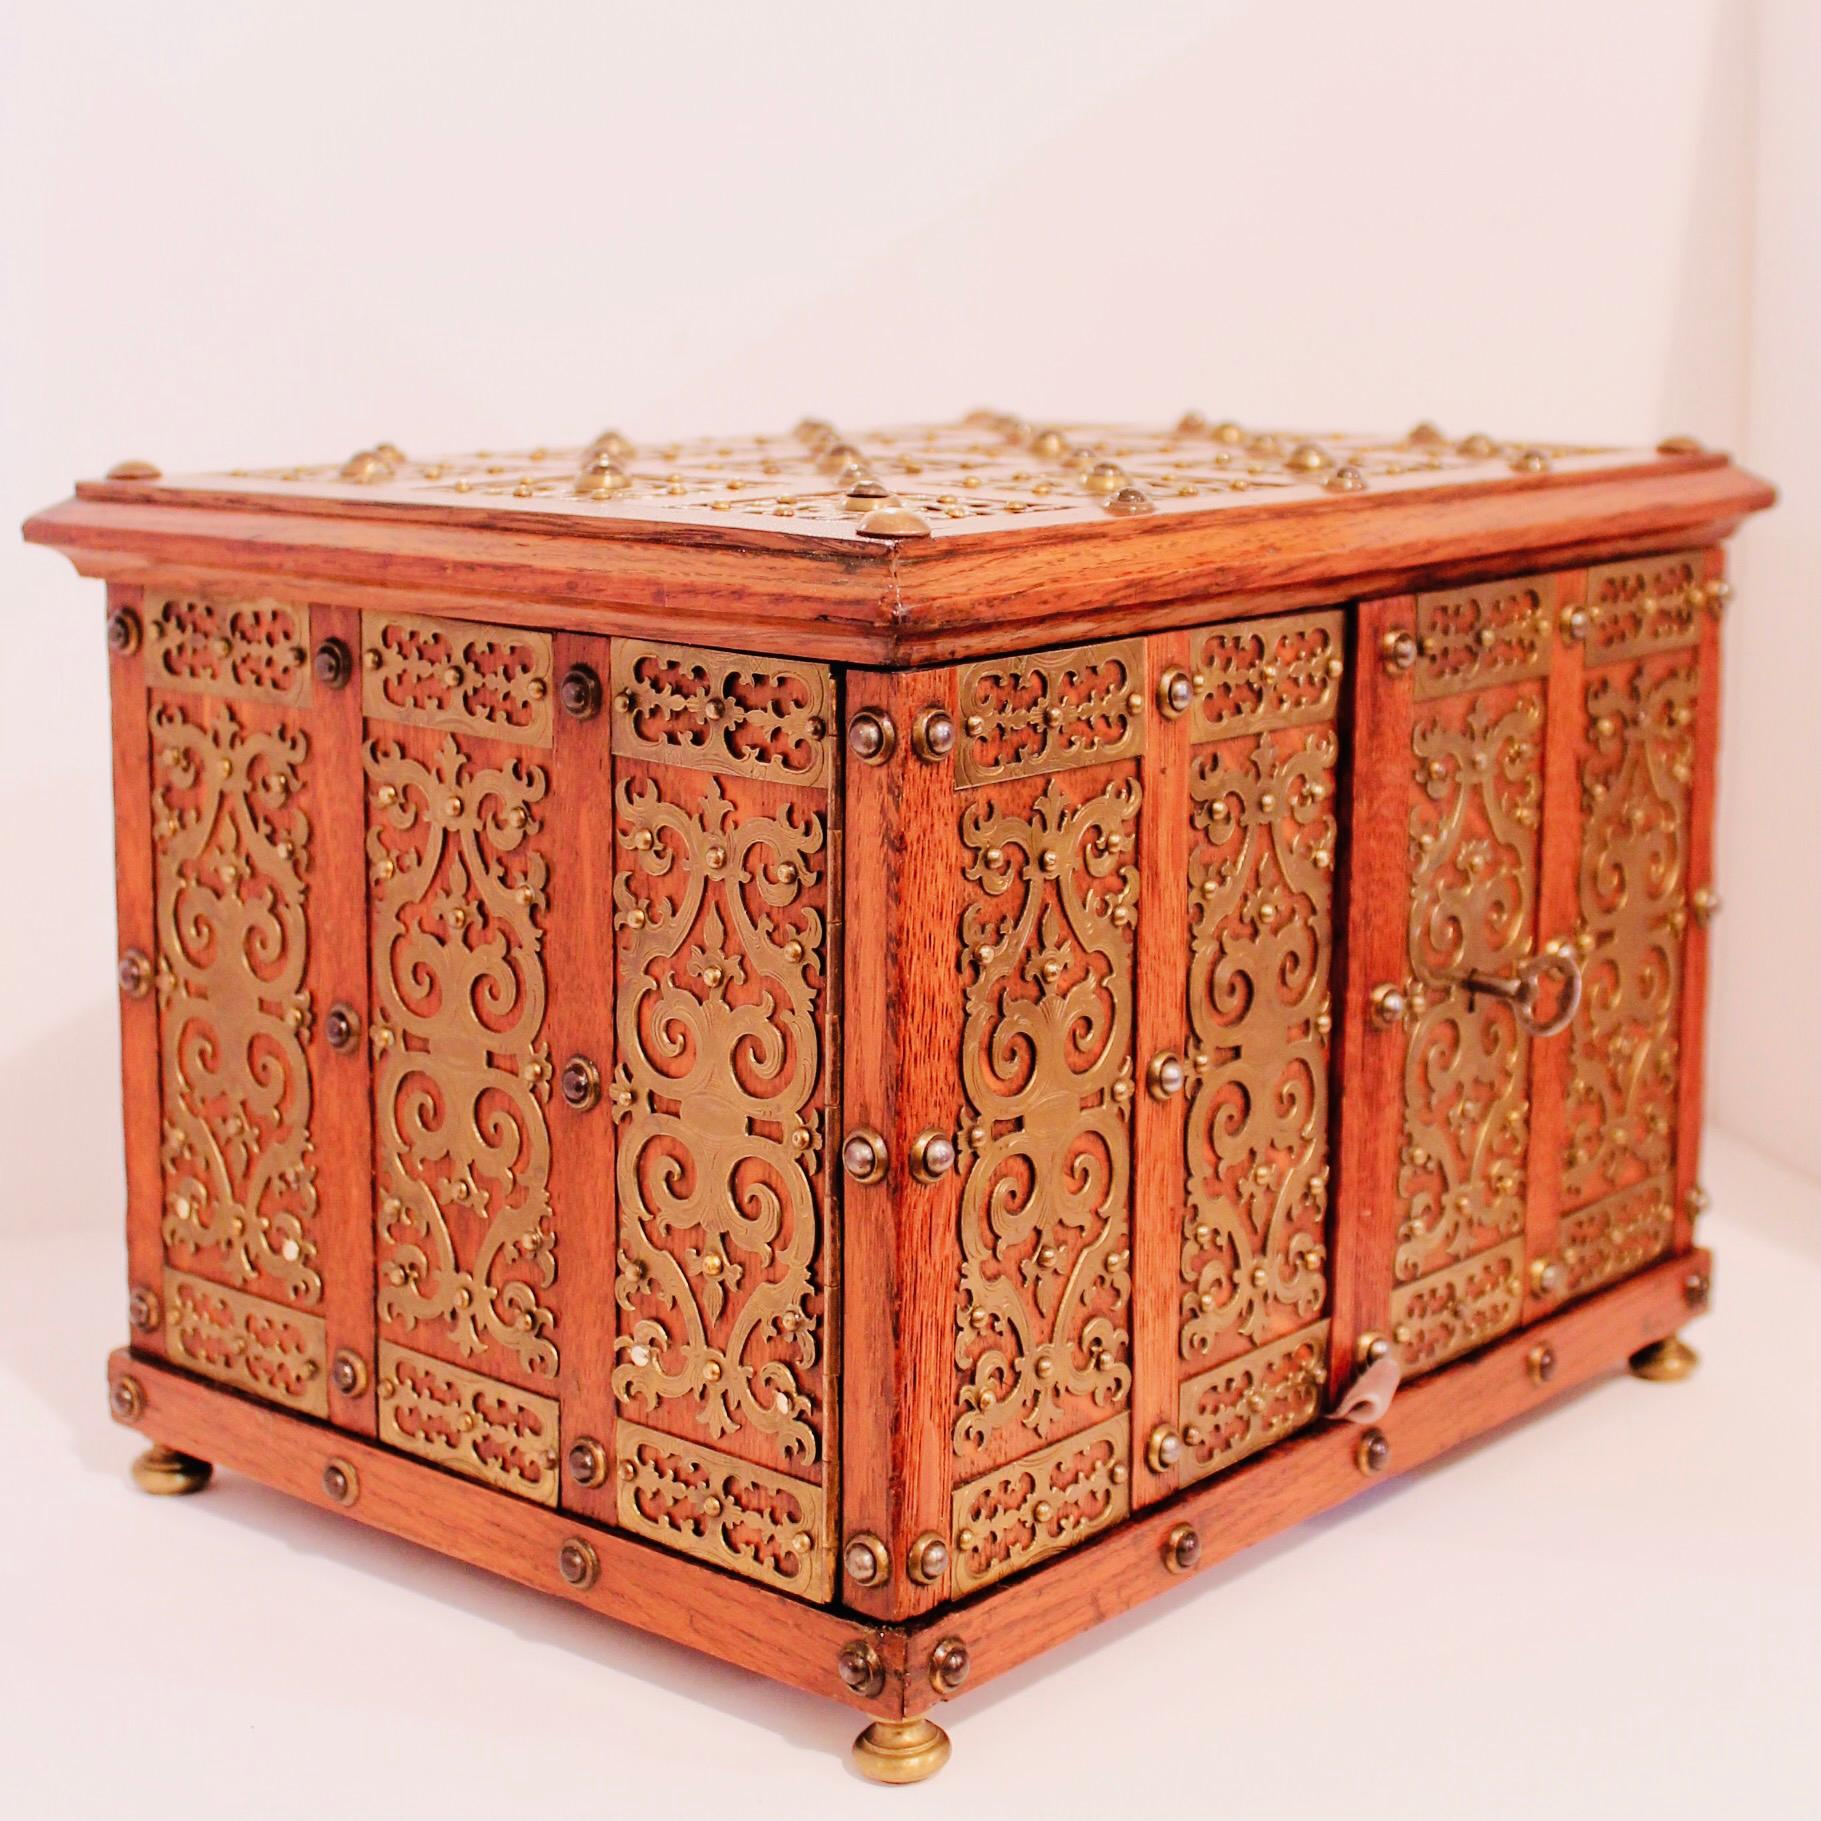 Baroque Revival English Victorian Brass Mounted Jewelry Box / Strong Box, 19th Century For Sale